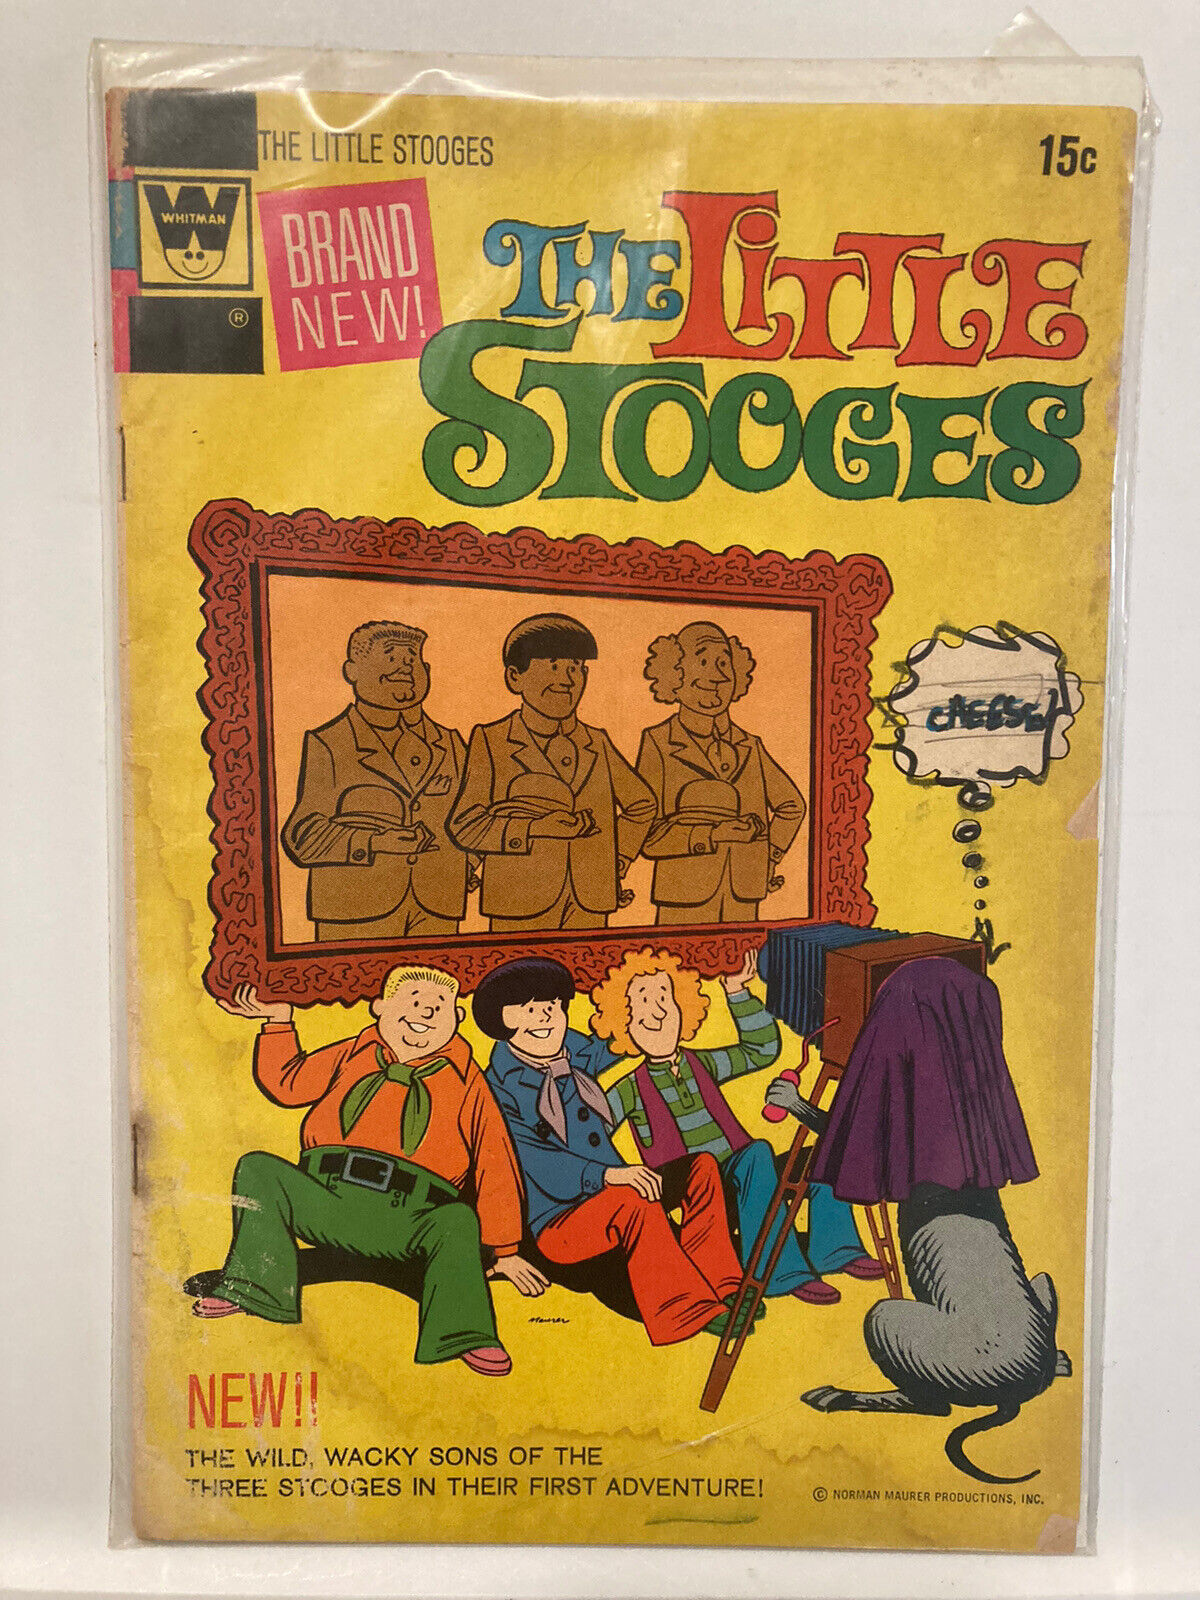 THE LITTLE STOOGES #1 - (1972) - WHITMAN COMICS - BRONZE AGE - BAGGED & BOARDED